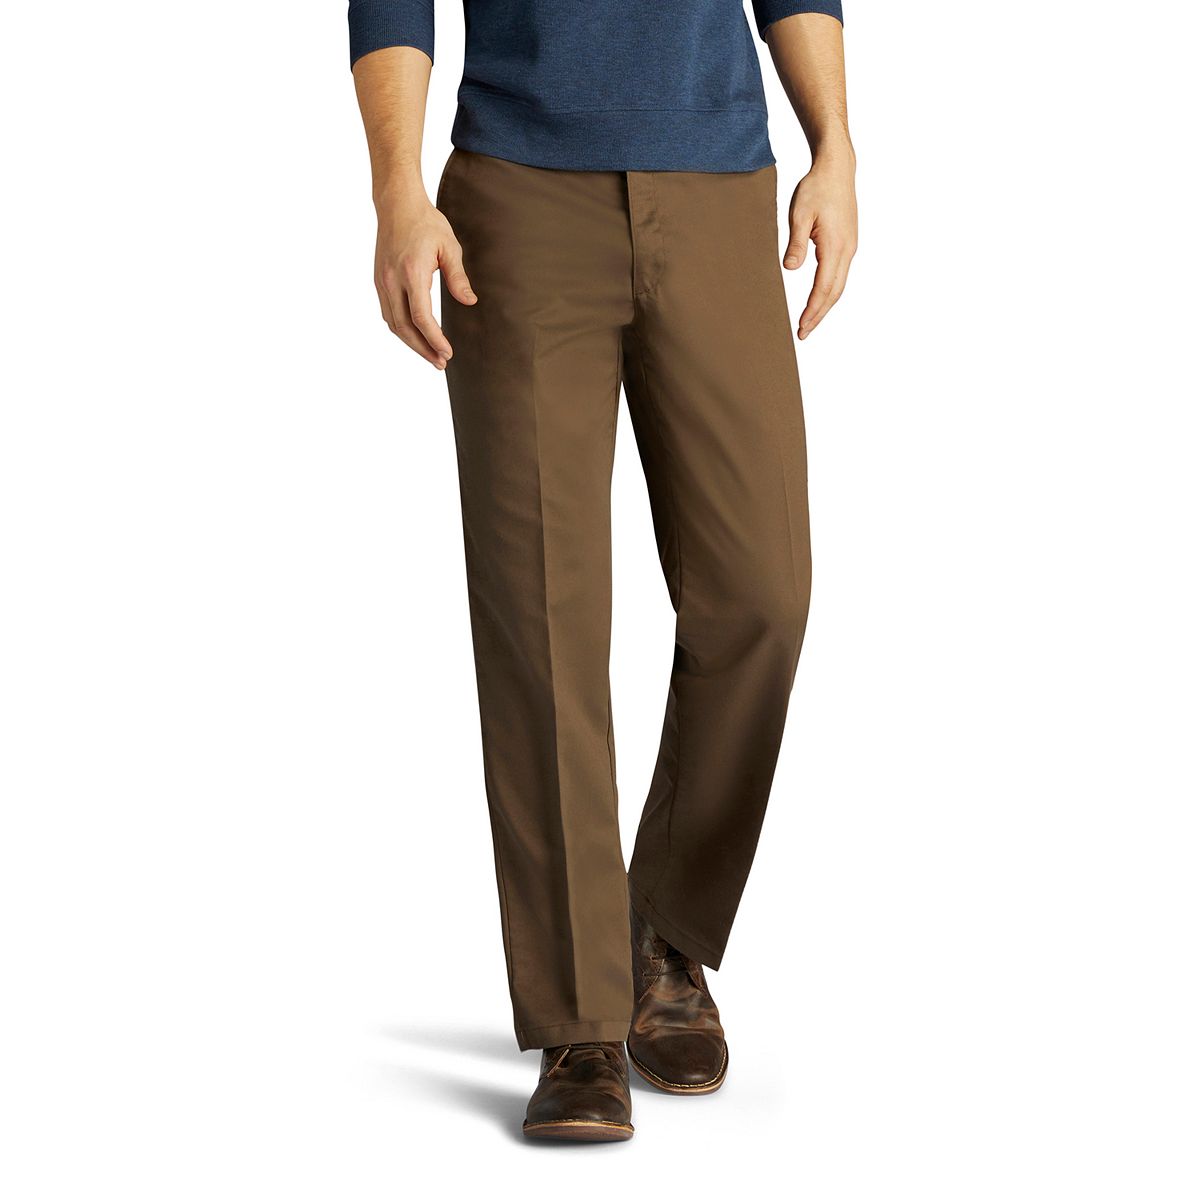 Lee Pants for Men: Add Classic Pants to Your Everyday Look | Kohl's